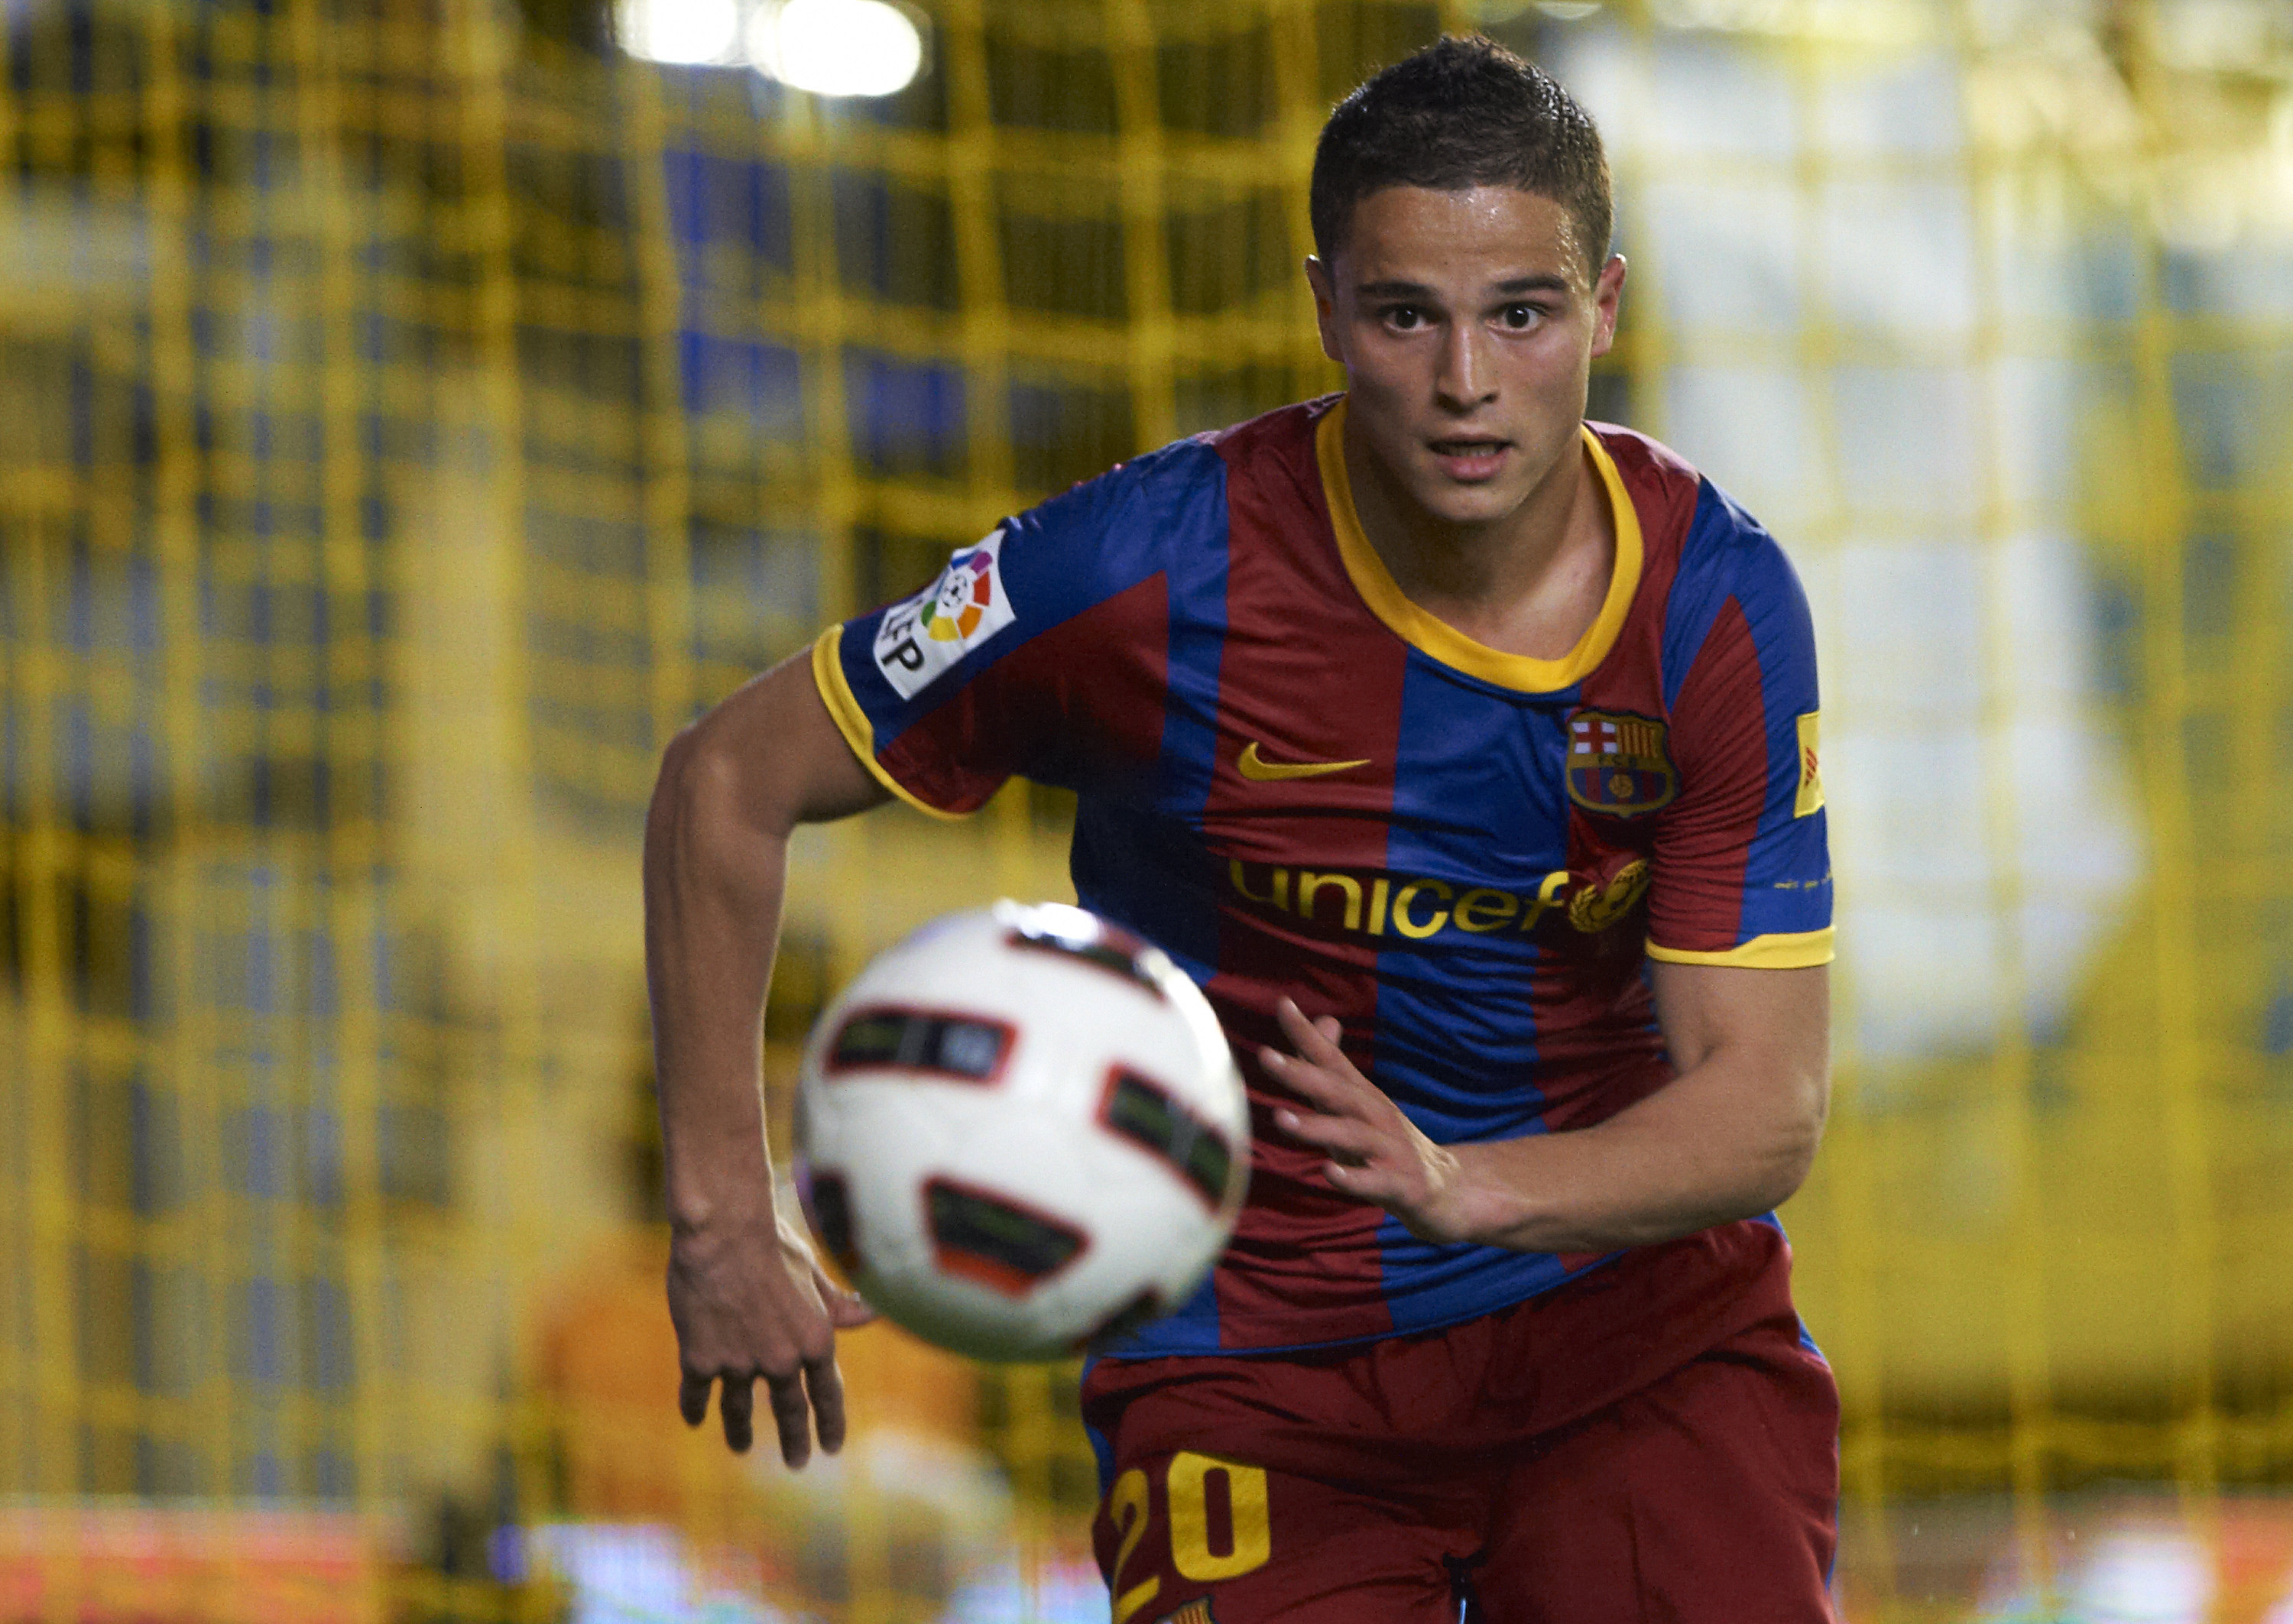 VILLARREAL, CASTELLON - APRIL 02:  Ibrahim Afellay of Barcelona in action during the La Liga match between Villarreal and Barcelona at El Madrigal on April 2, 2011 in Villarreal, Spain. Barcelona won 1-0.  (Photo by Manuel Queimadelos Alonso/Getty Images)